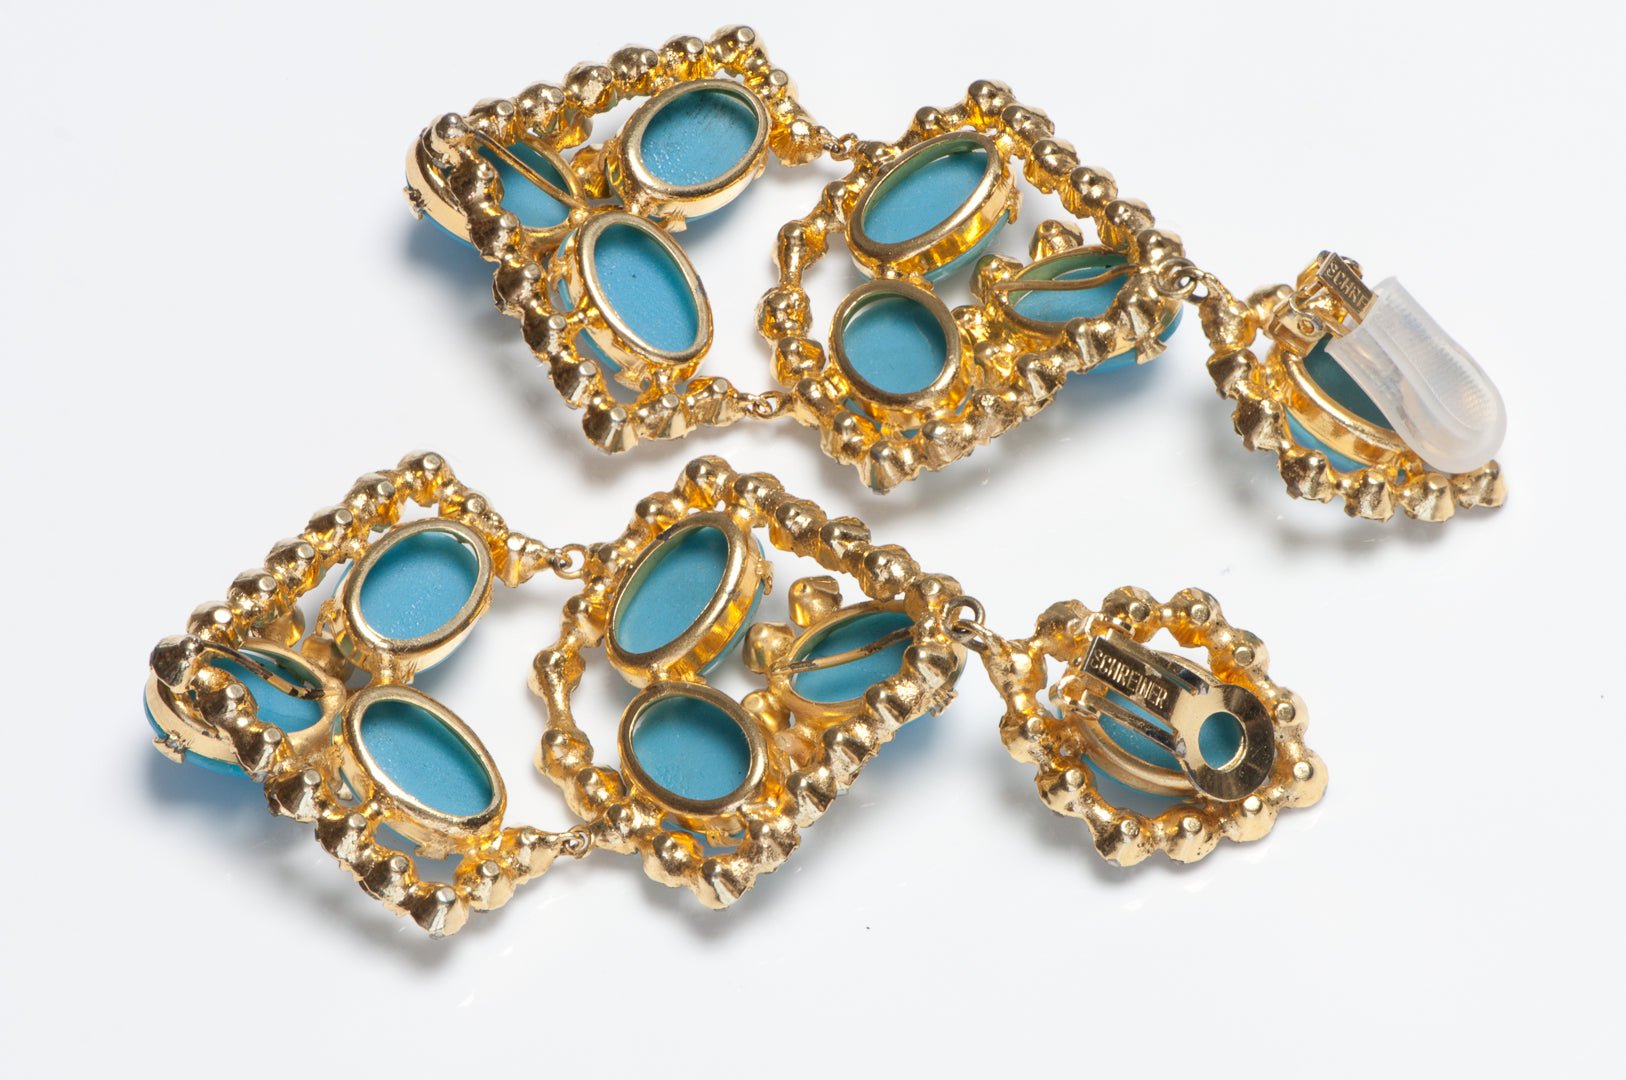 Vintage 1960's Schreiner NY Mughal Style Turquoise Crystal Chandelier Earrings